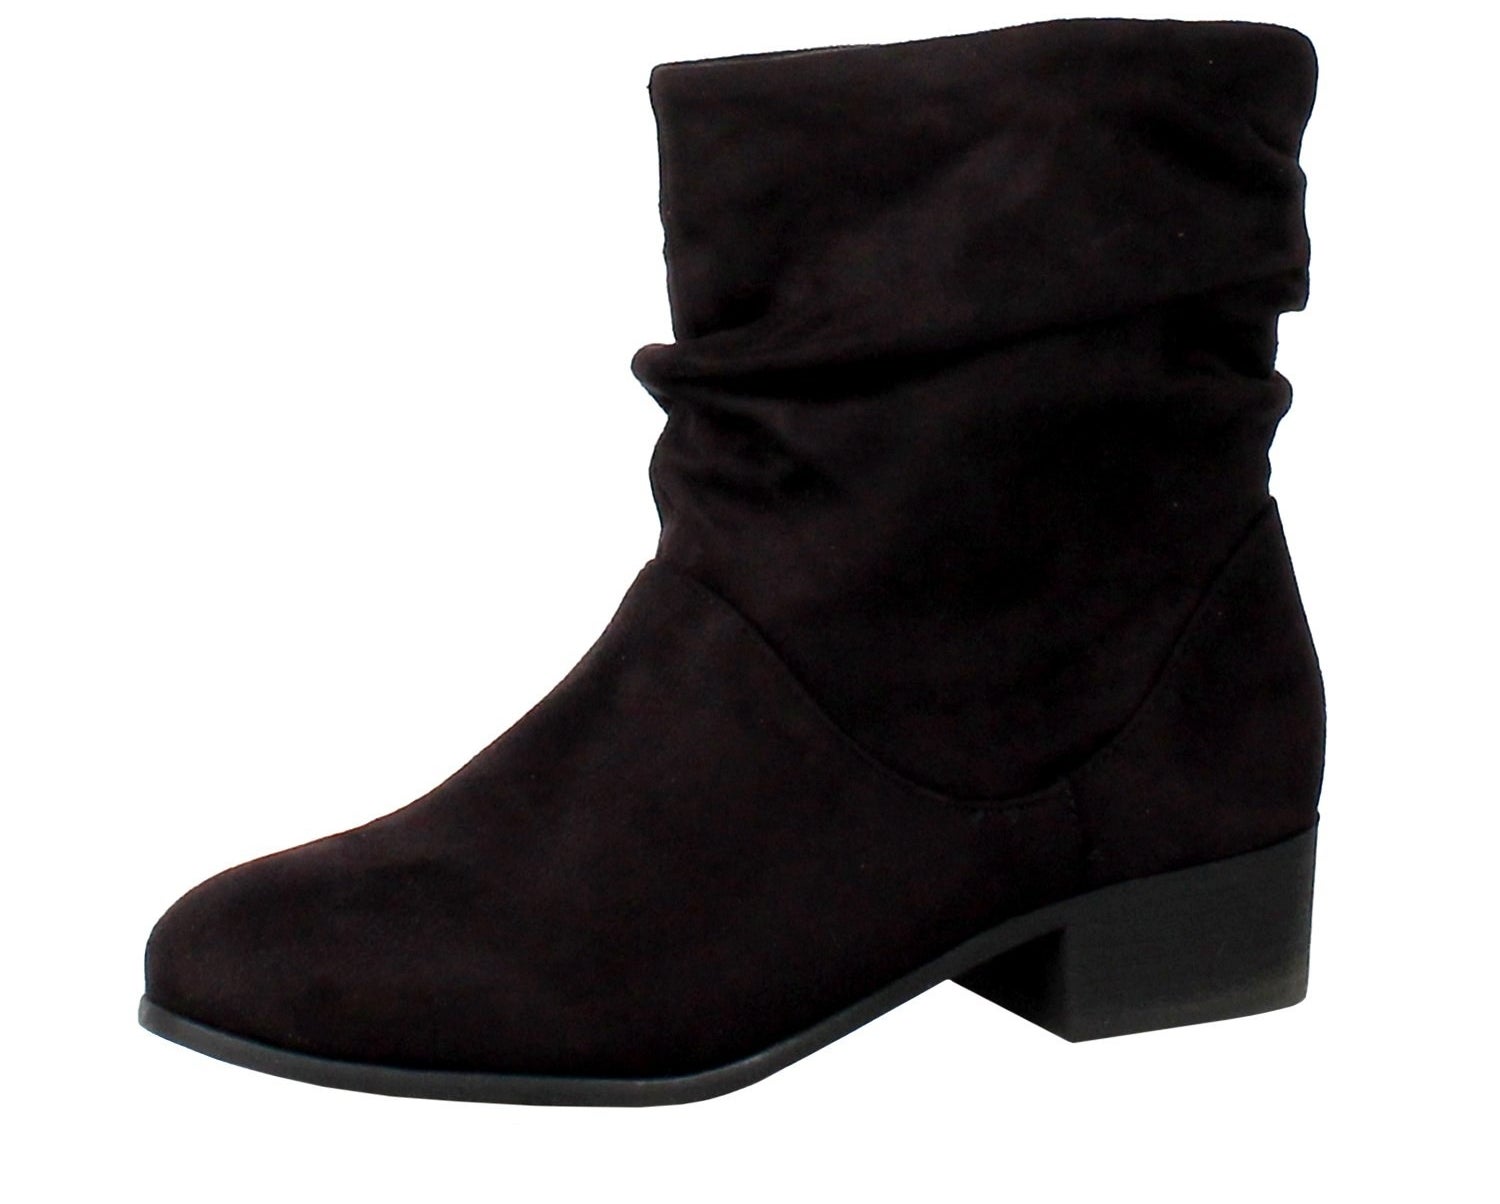 black slouchy booties with a small heel